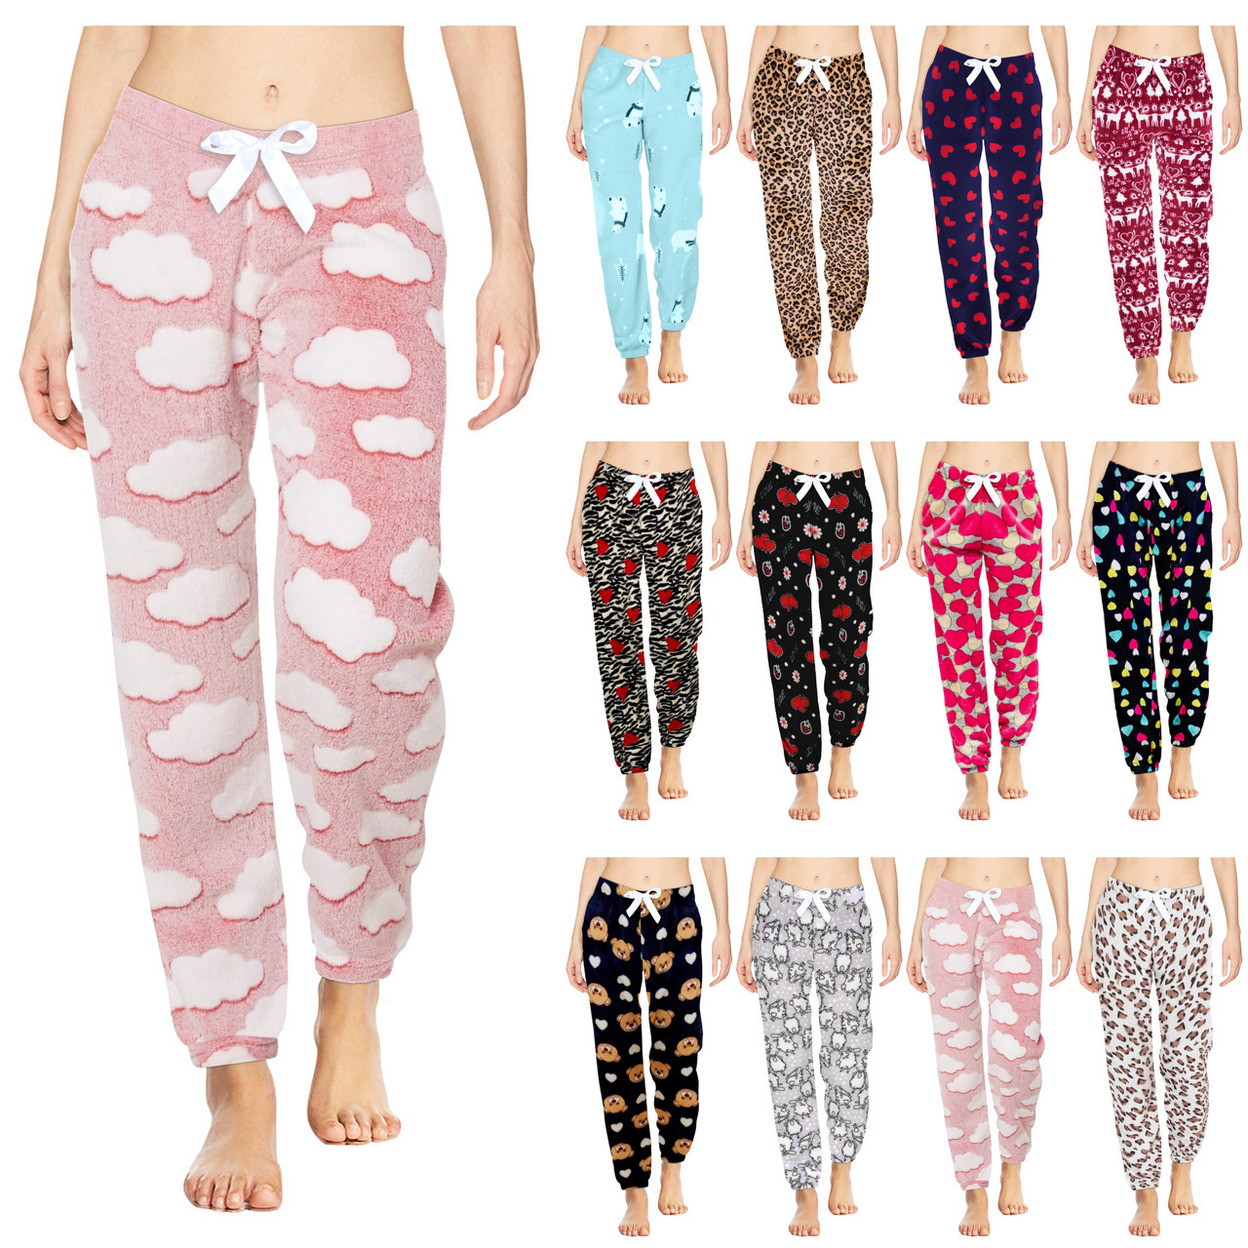 Multi-Pack: Women's Printed Ultra-Soft Comfy Stretch Micro-Fleece Pajama Lounge Pants - 1-pack, Love, Large